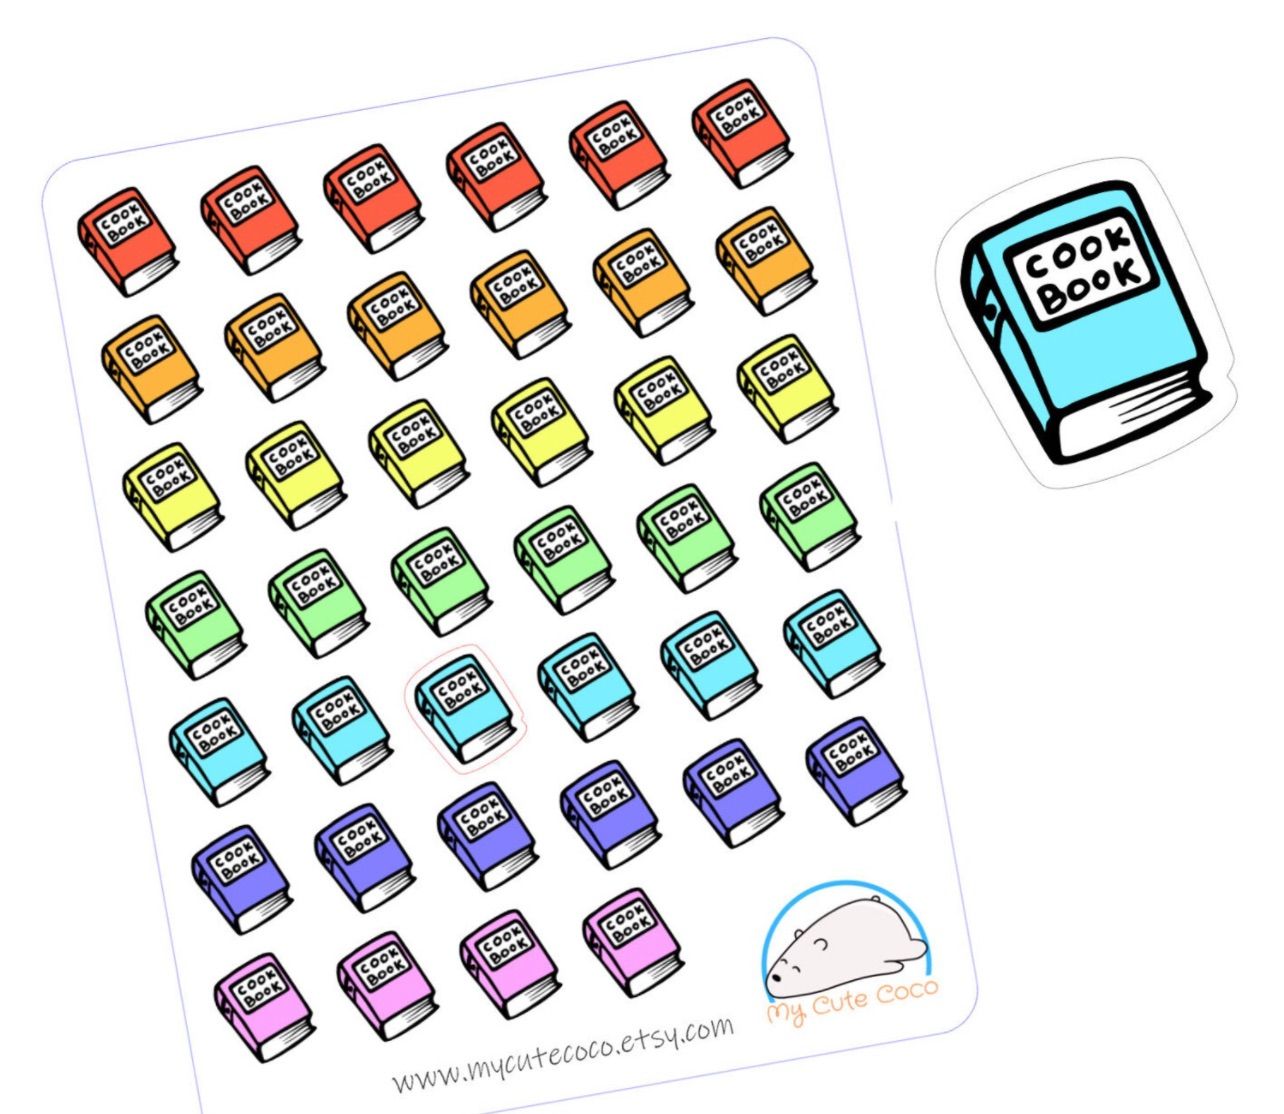 Rainbow colored sticker sheet. Each sticker is a tiny cookbook which reads "cook book."